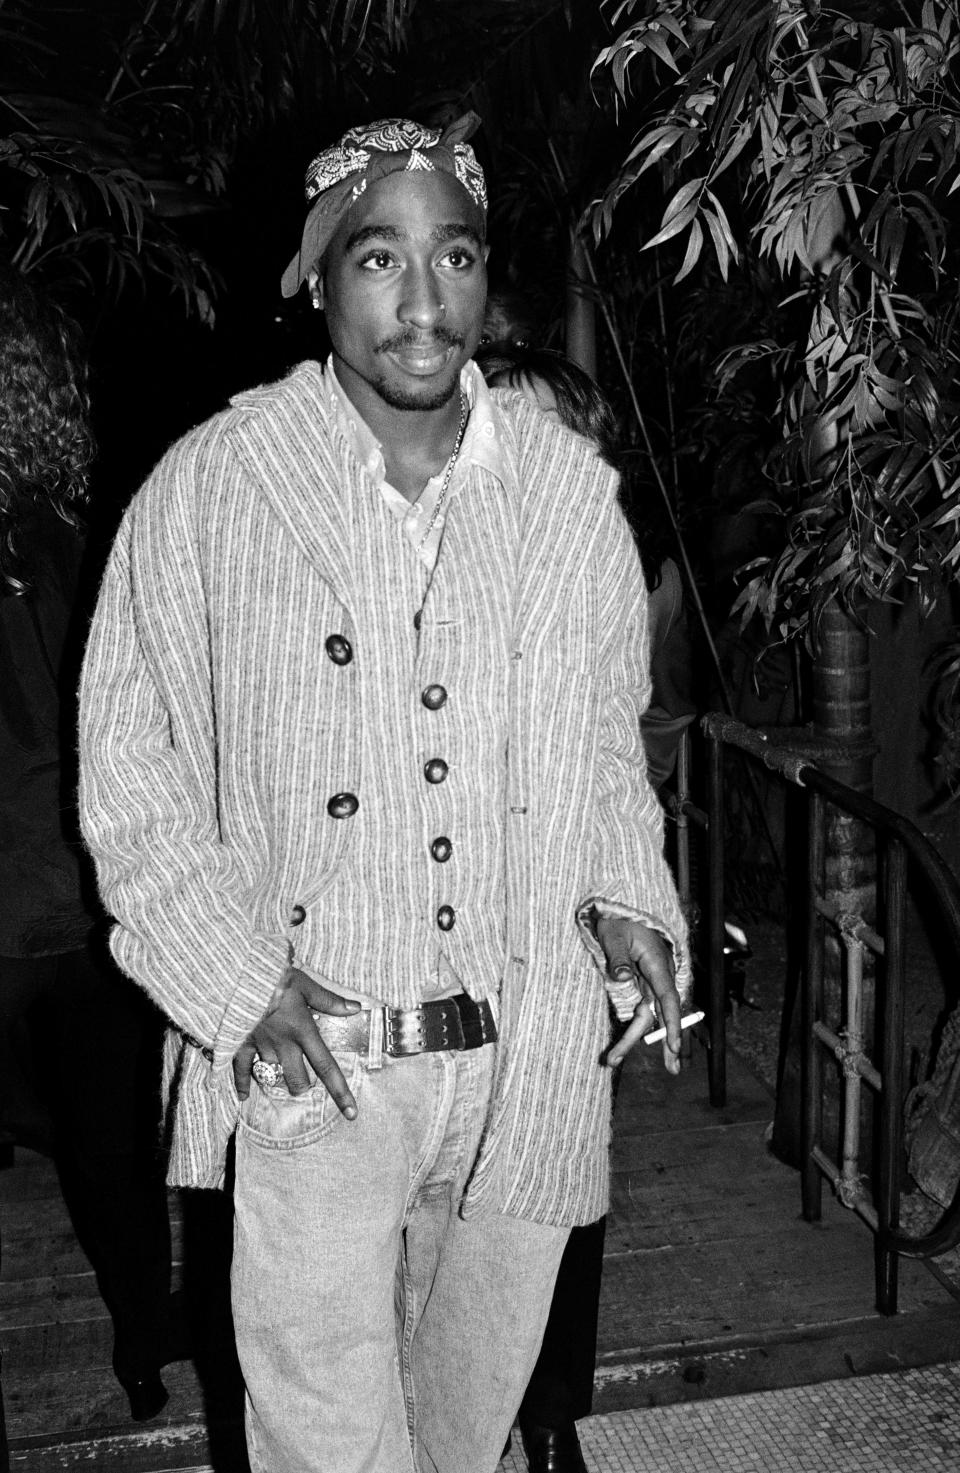 Tupac Shakur attends “I Like It Like That” New York Premiere and Afterparty in New York City on October 14, 1994. (Photo by Eric Weiss/WWD via Getty Images)